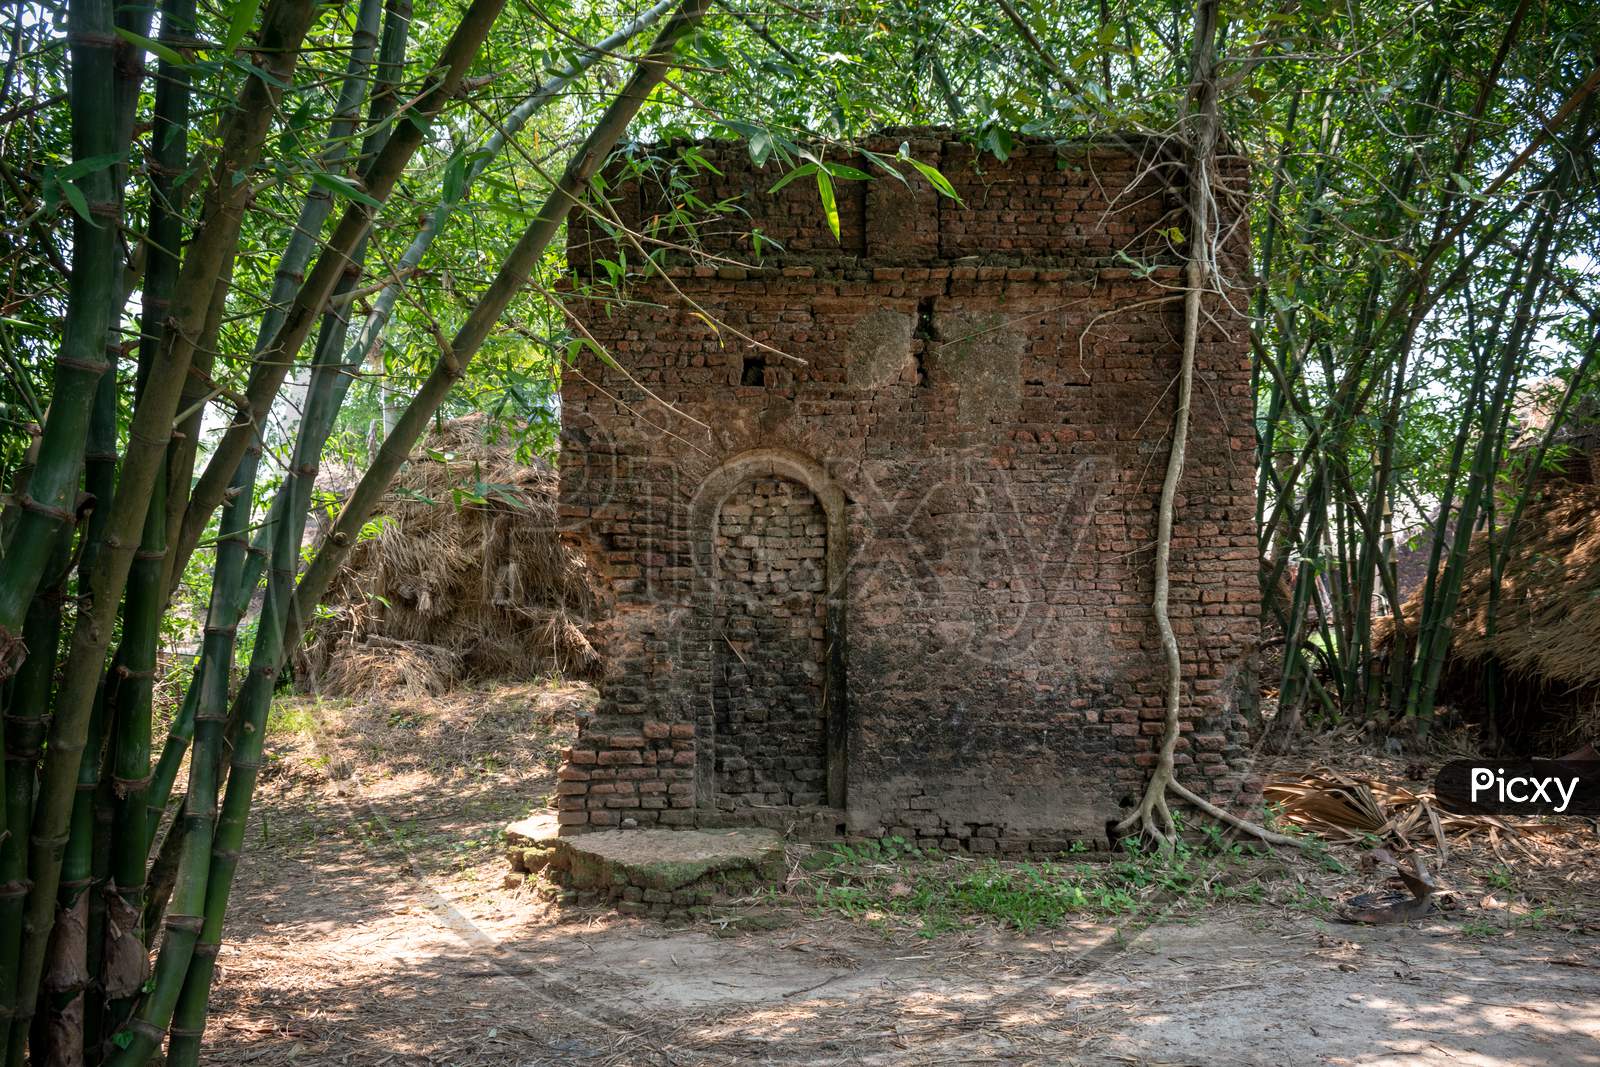 Picture Of A Century-Old Ruined And Abandoned Temple Inside The Jungle